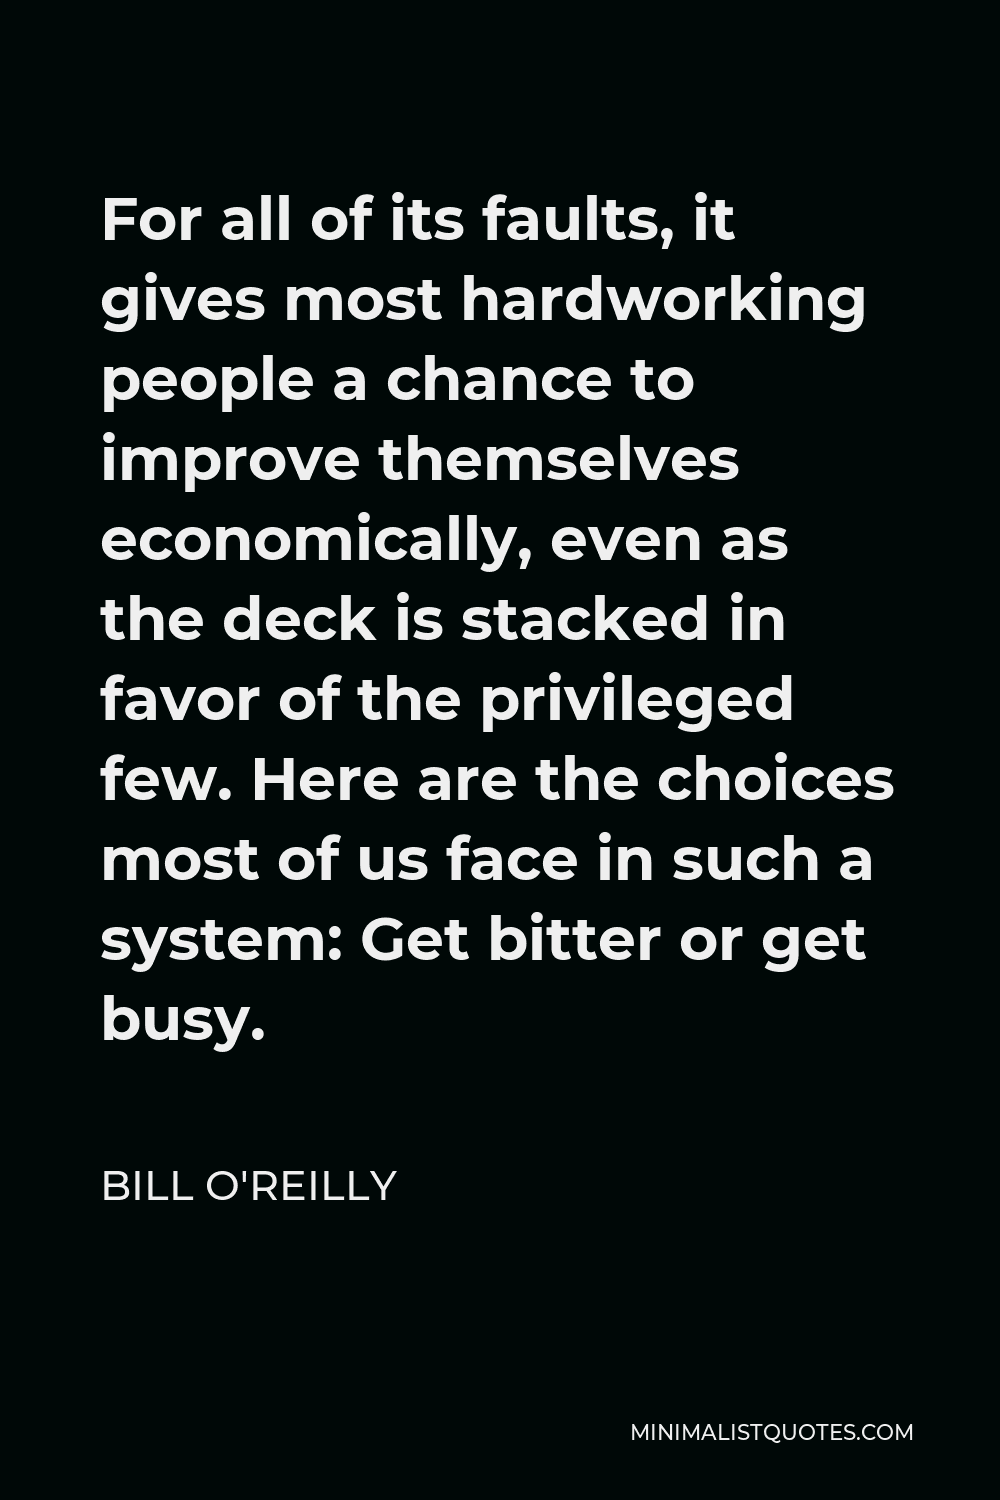 Bill O'Reilly Quote - For all of its faults, it gives most hardworking people a chance to improve themselves economically, even as the deck is stacked in favor of the privileged few. Here are the choices most of us face in such a system: Get bitter or get busy.